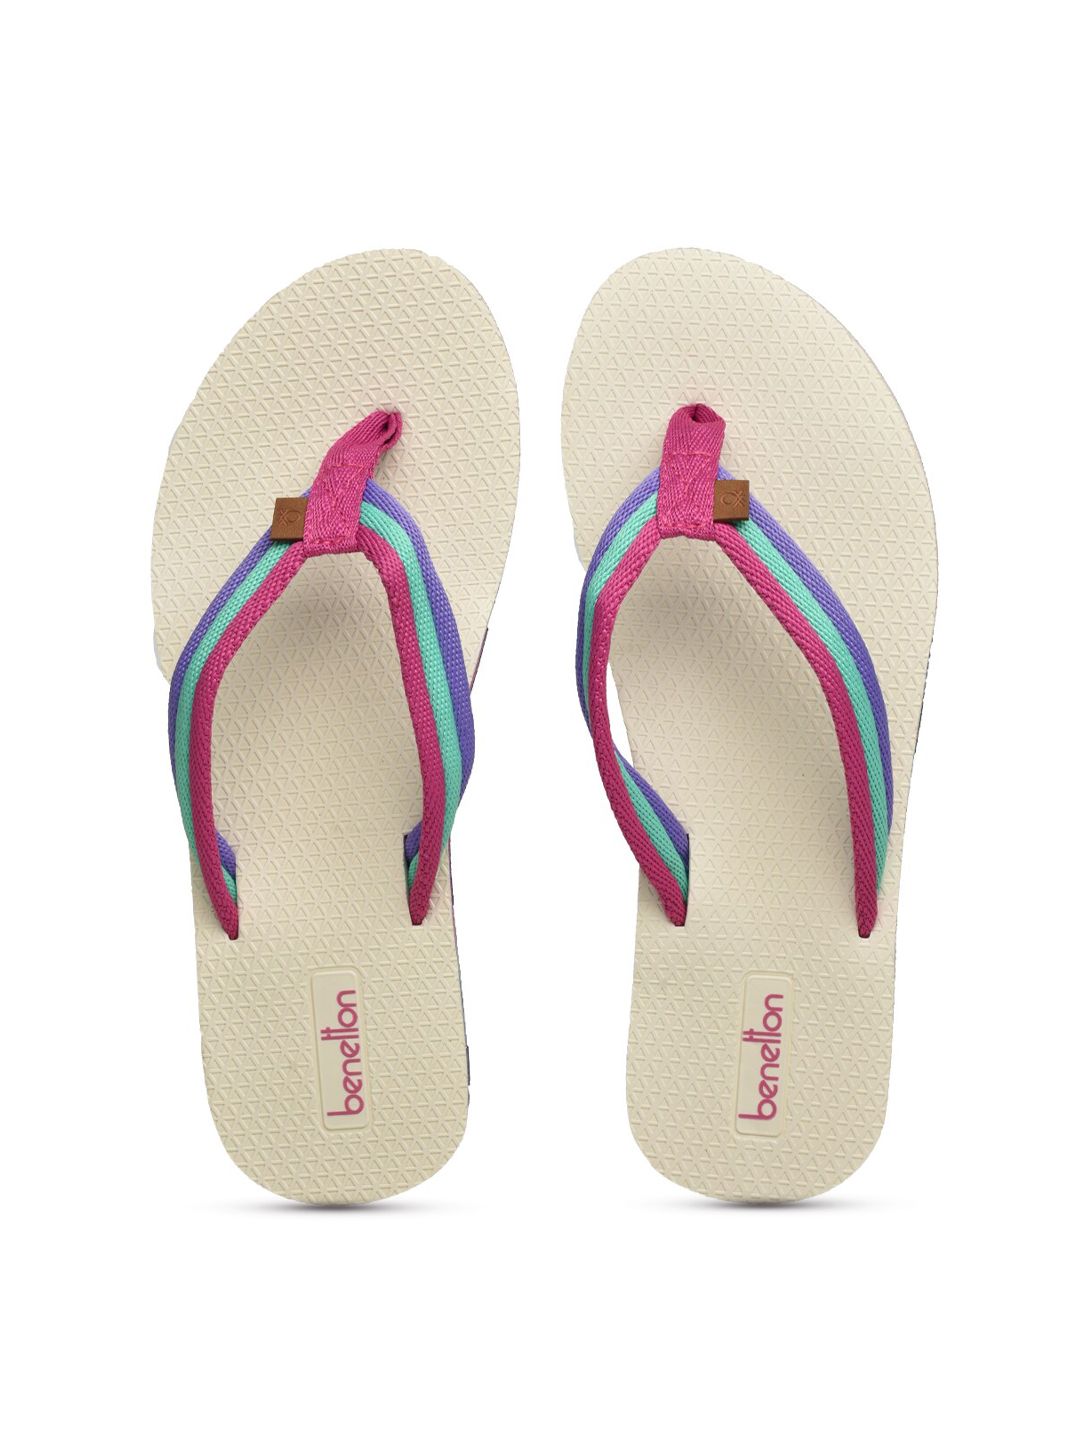 United Colors of Benetton Women Off White & Pink Striped Thong Flip-Flops Price in India